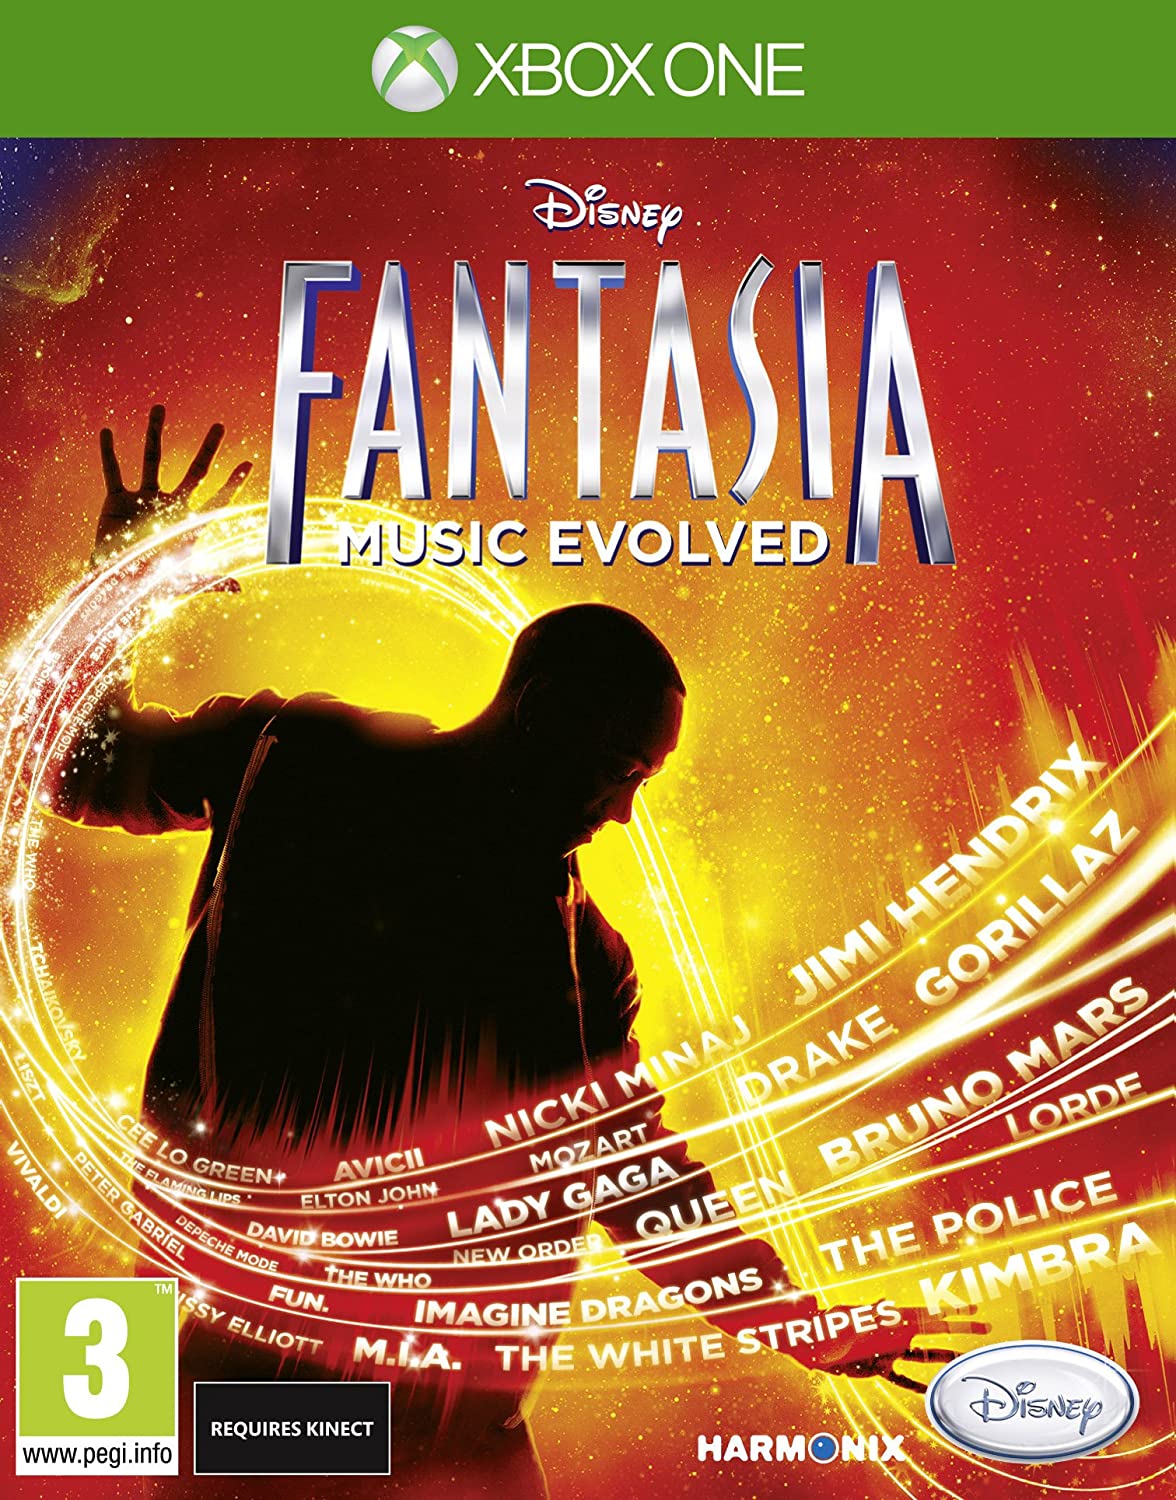 Fantasia: Music Evolved player count stats